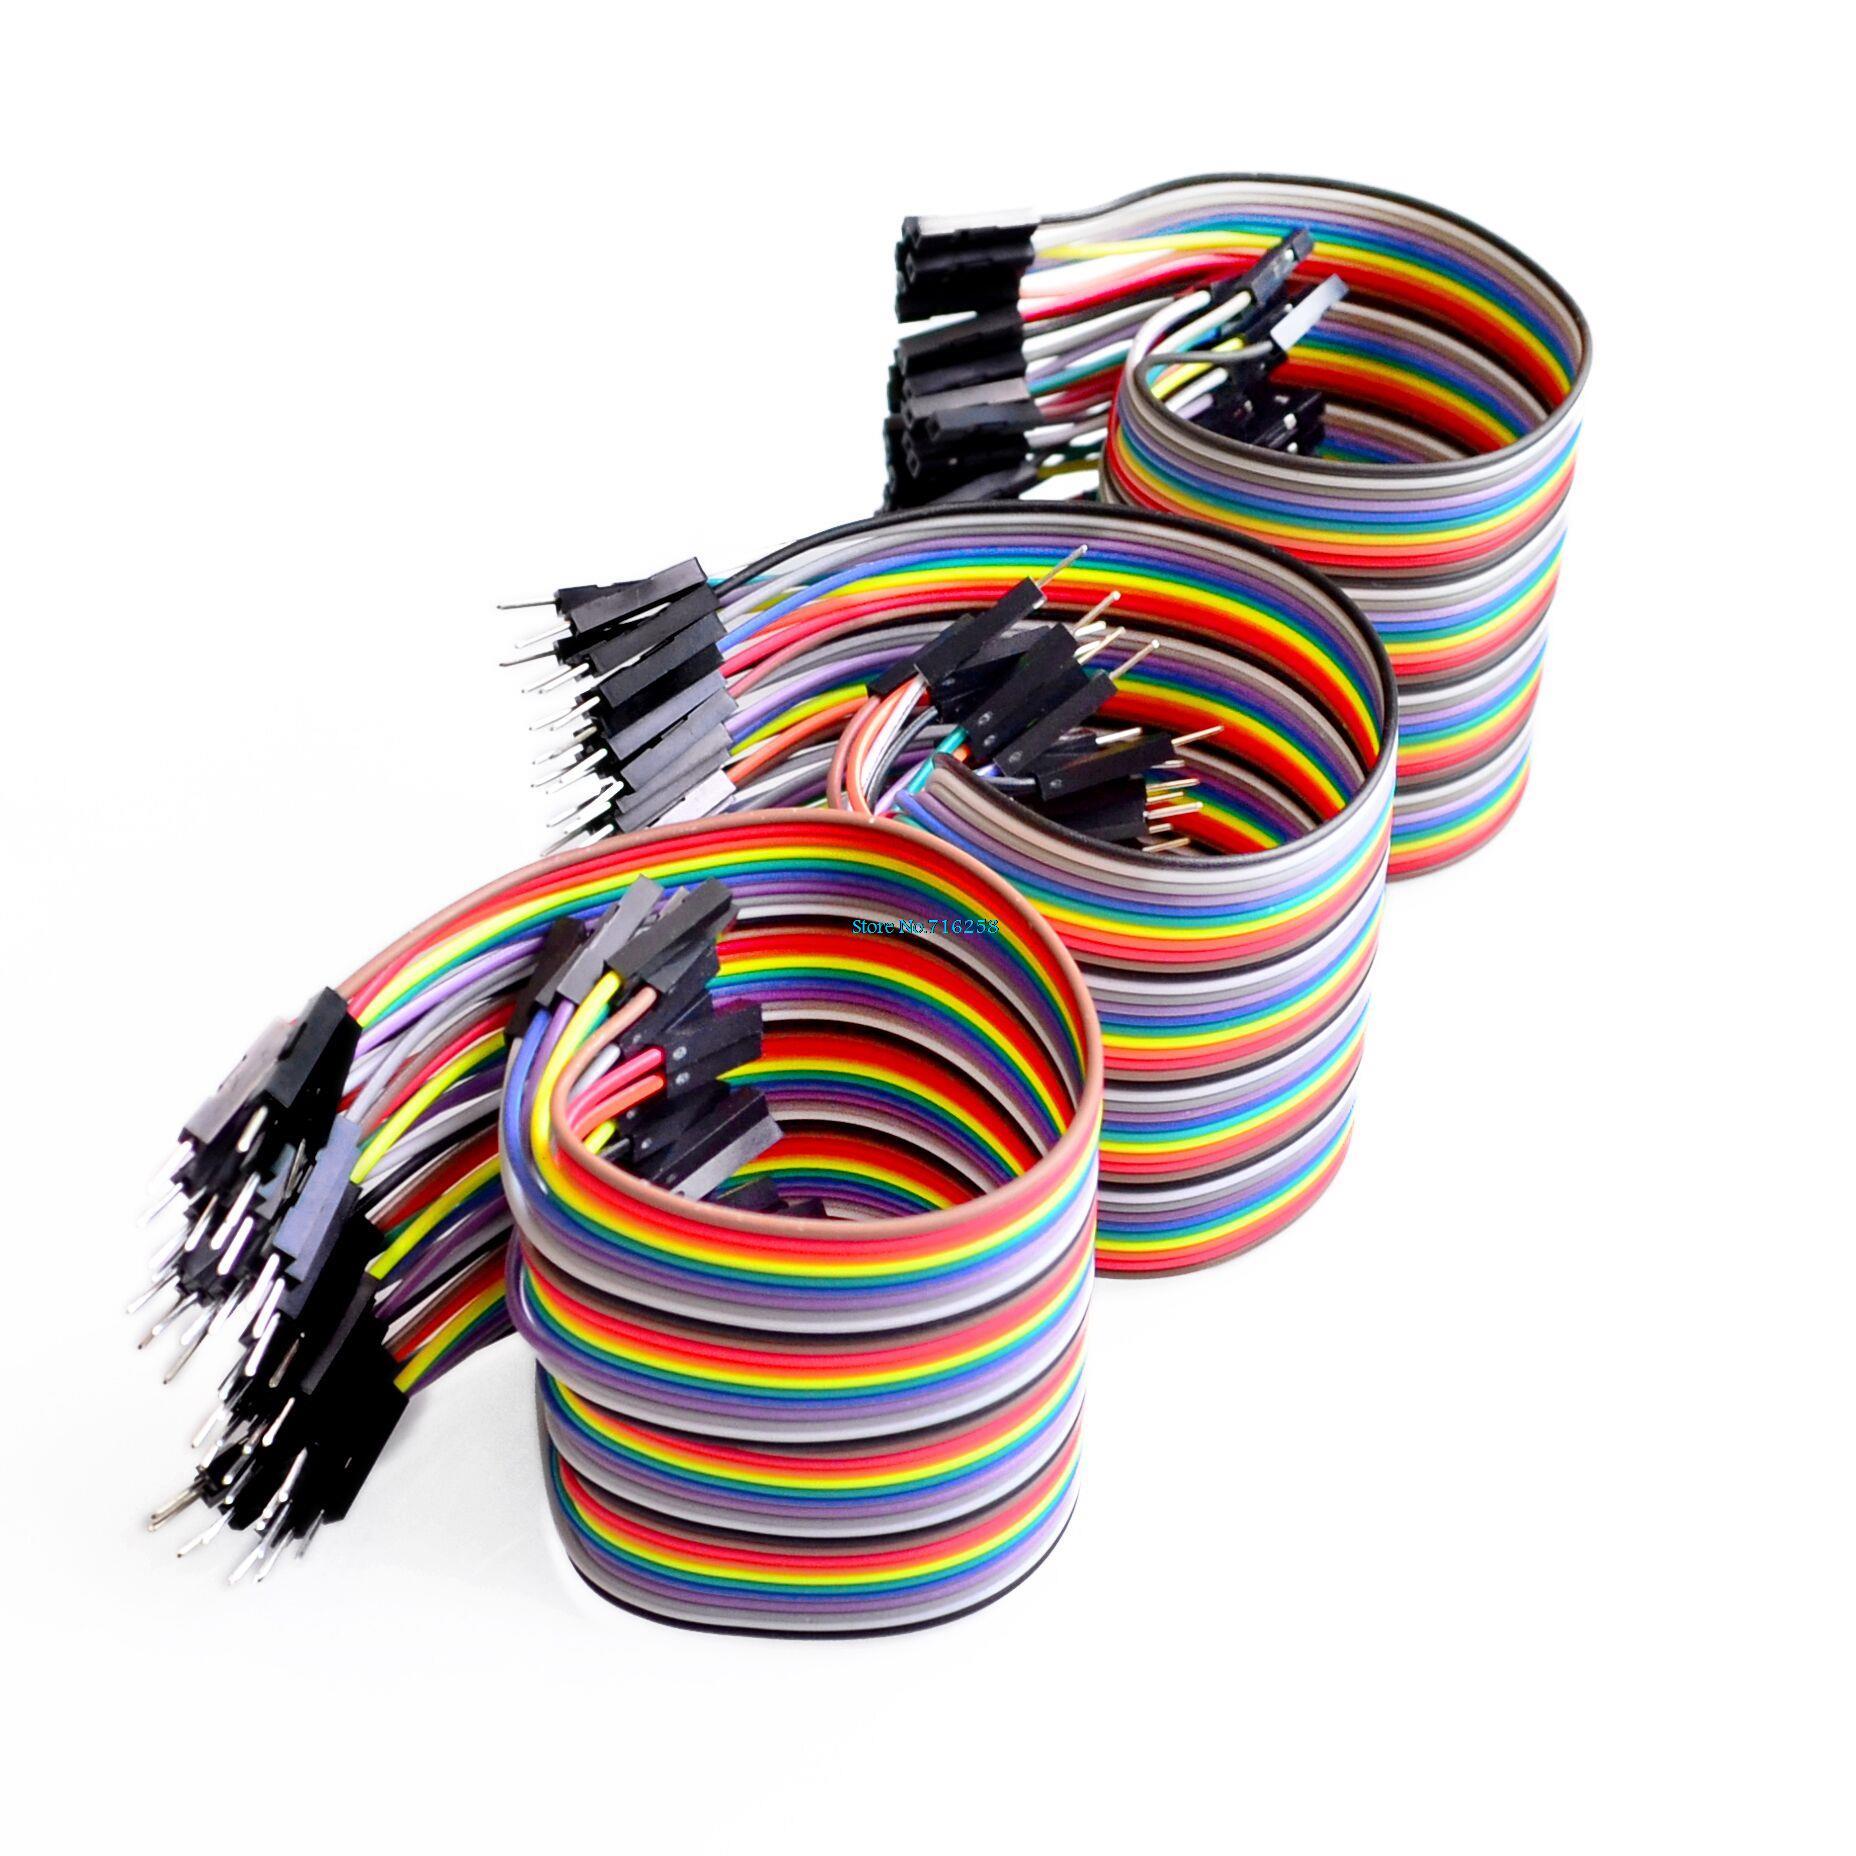 Dupont-line-120pcs-20cm-male-to-male-male-to-female-and-female-to-female-jumper-wire-Dupont-cable